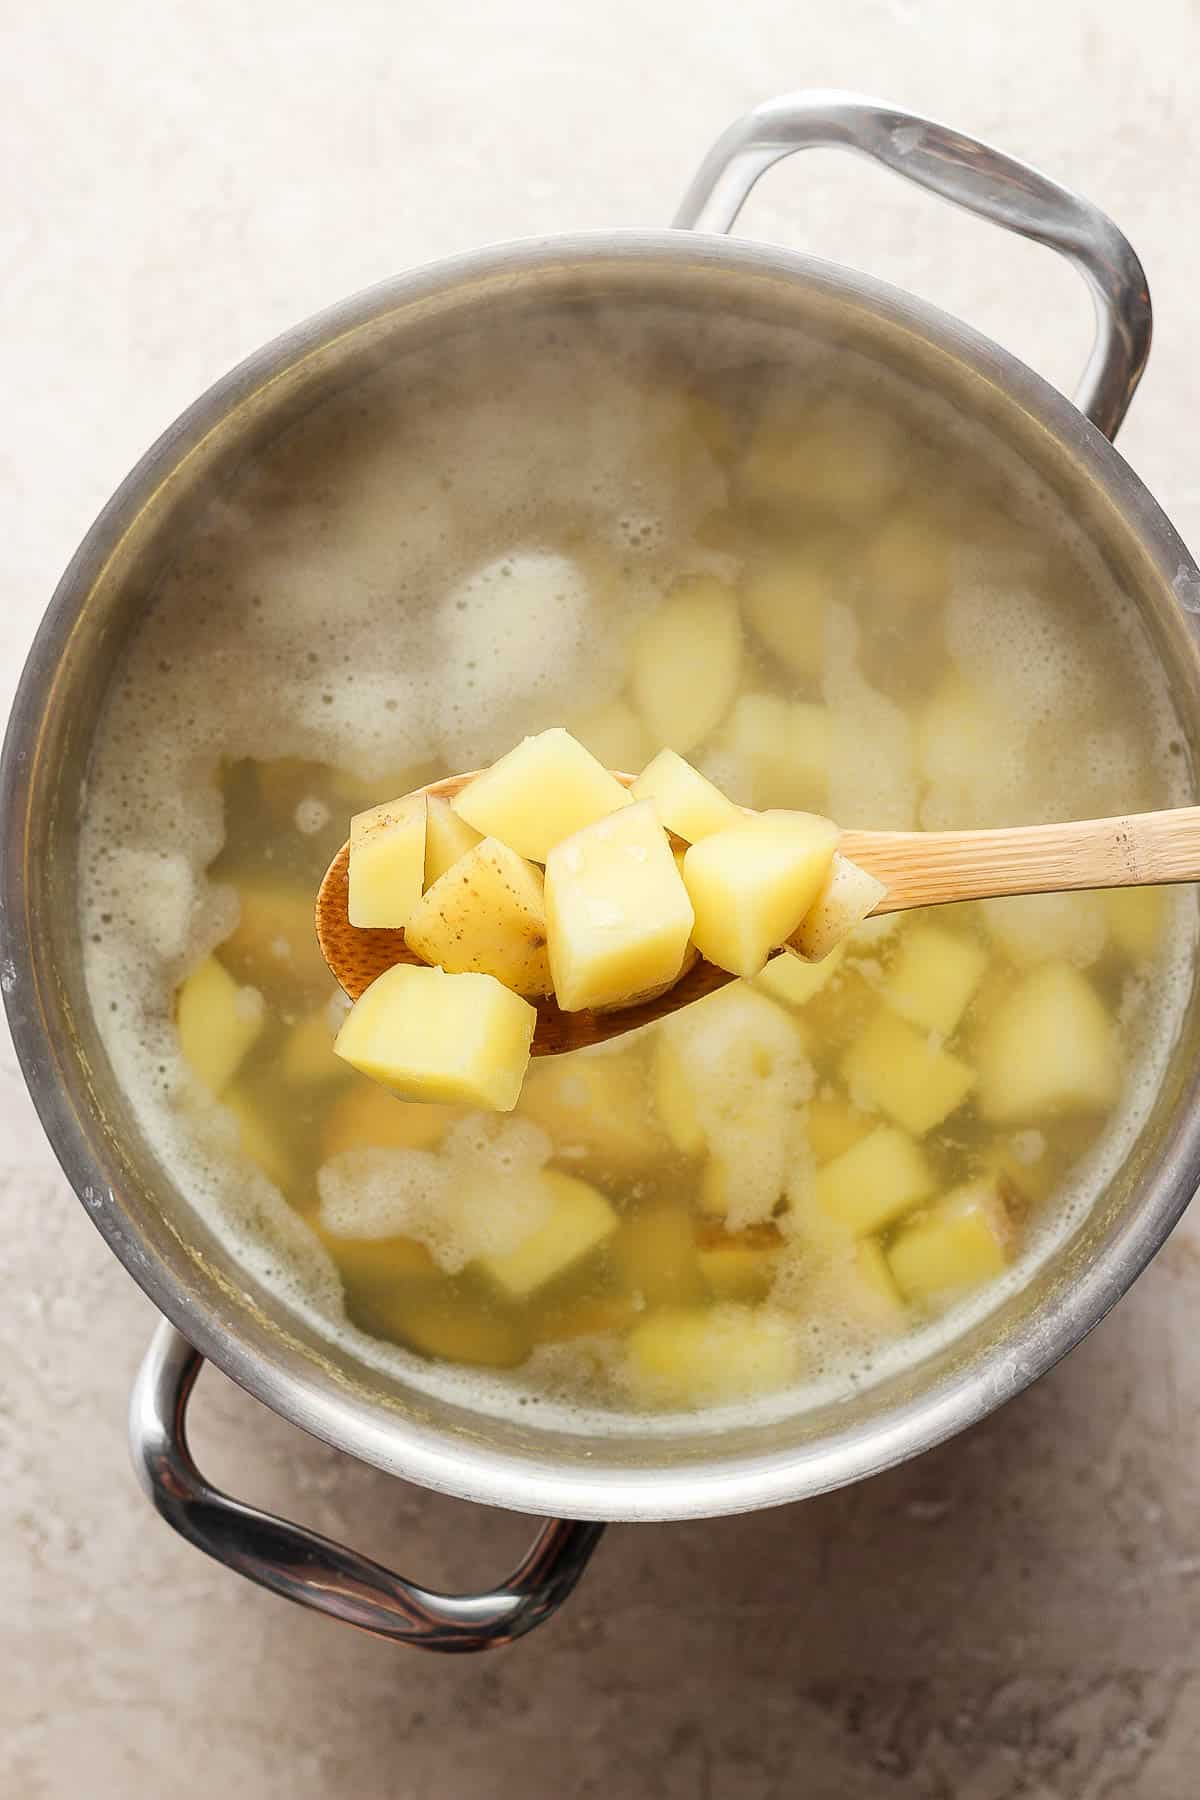 A wooden spoon lifting some cooked potatoes out of a dutch oven.